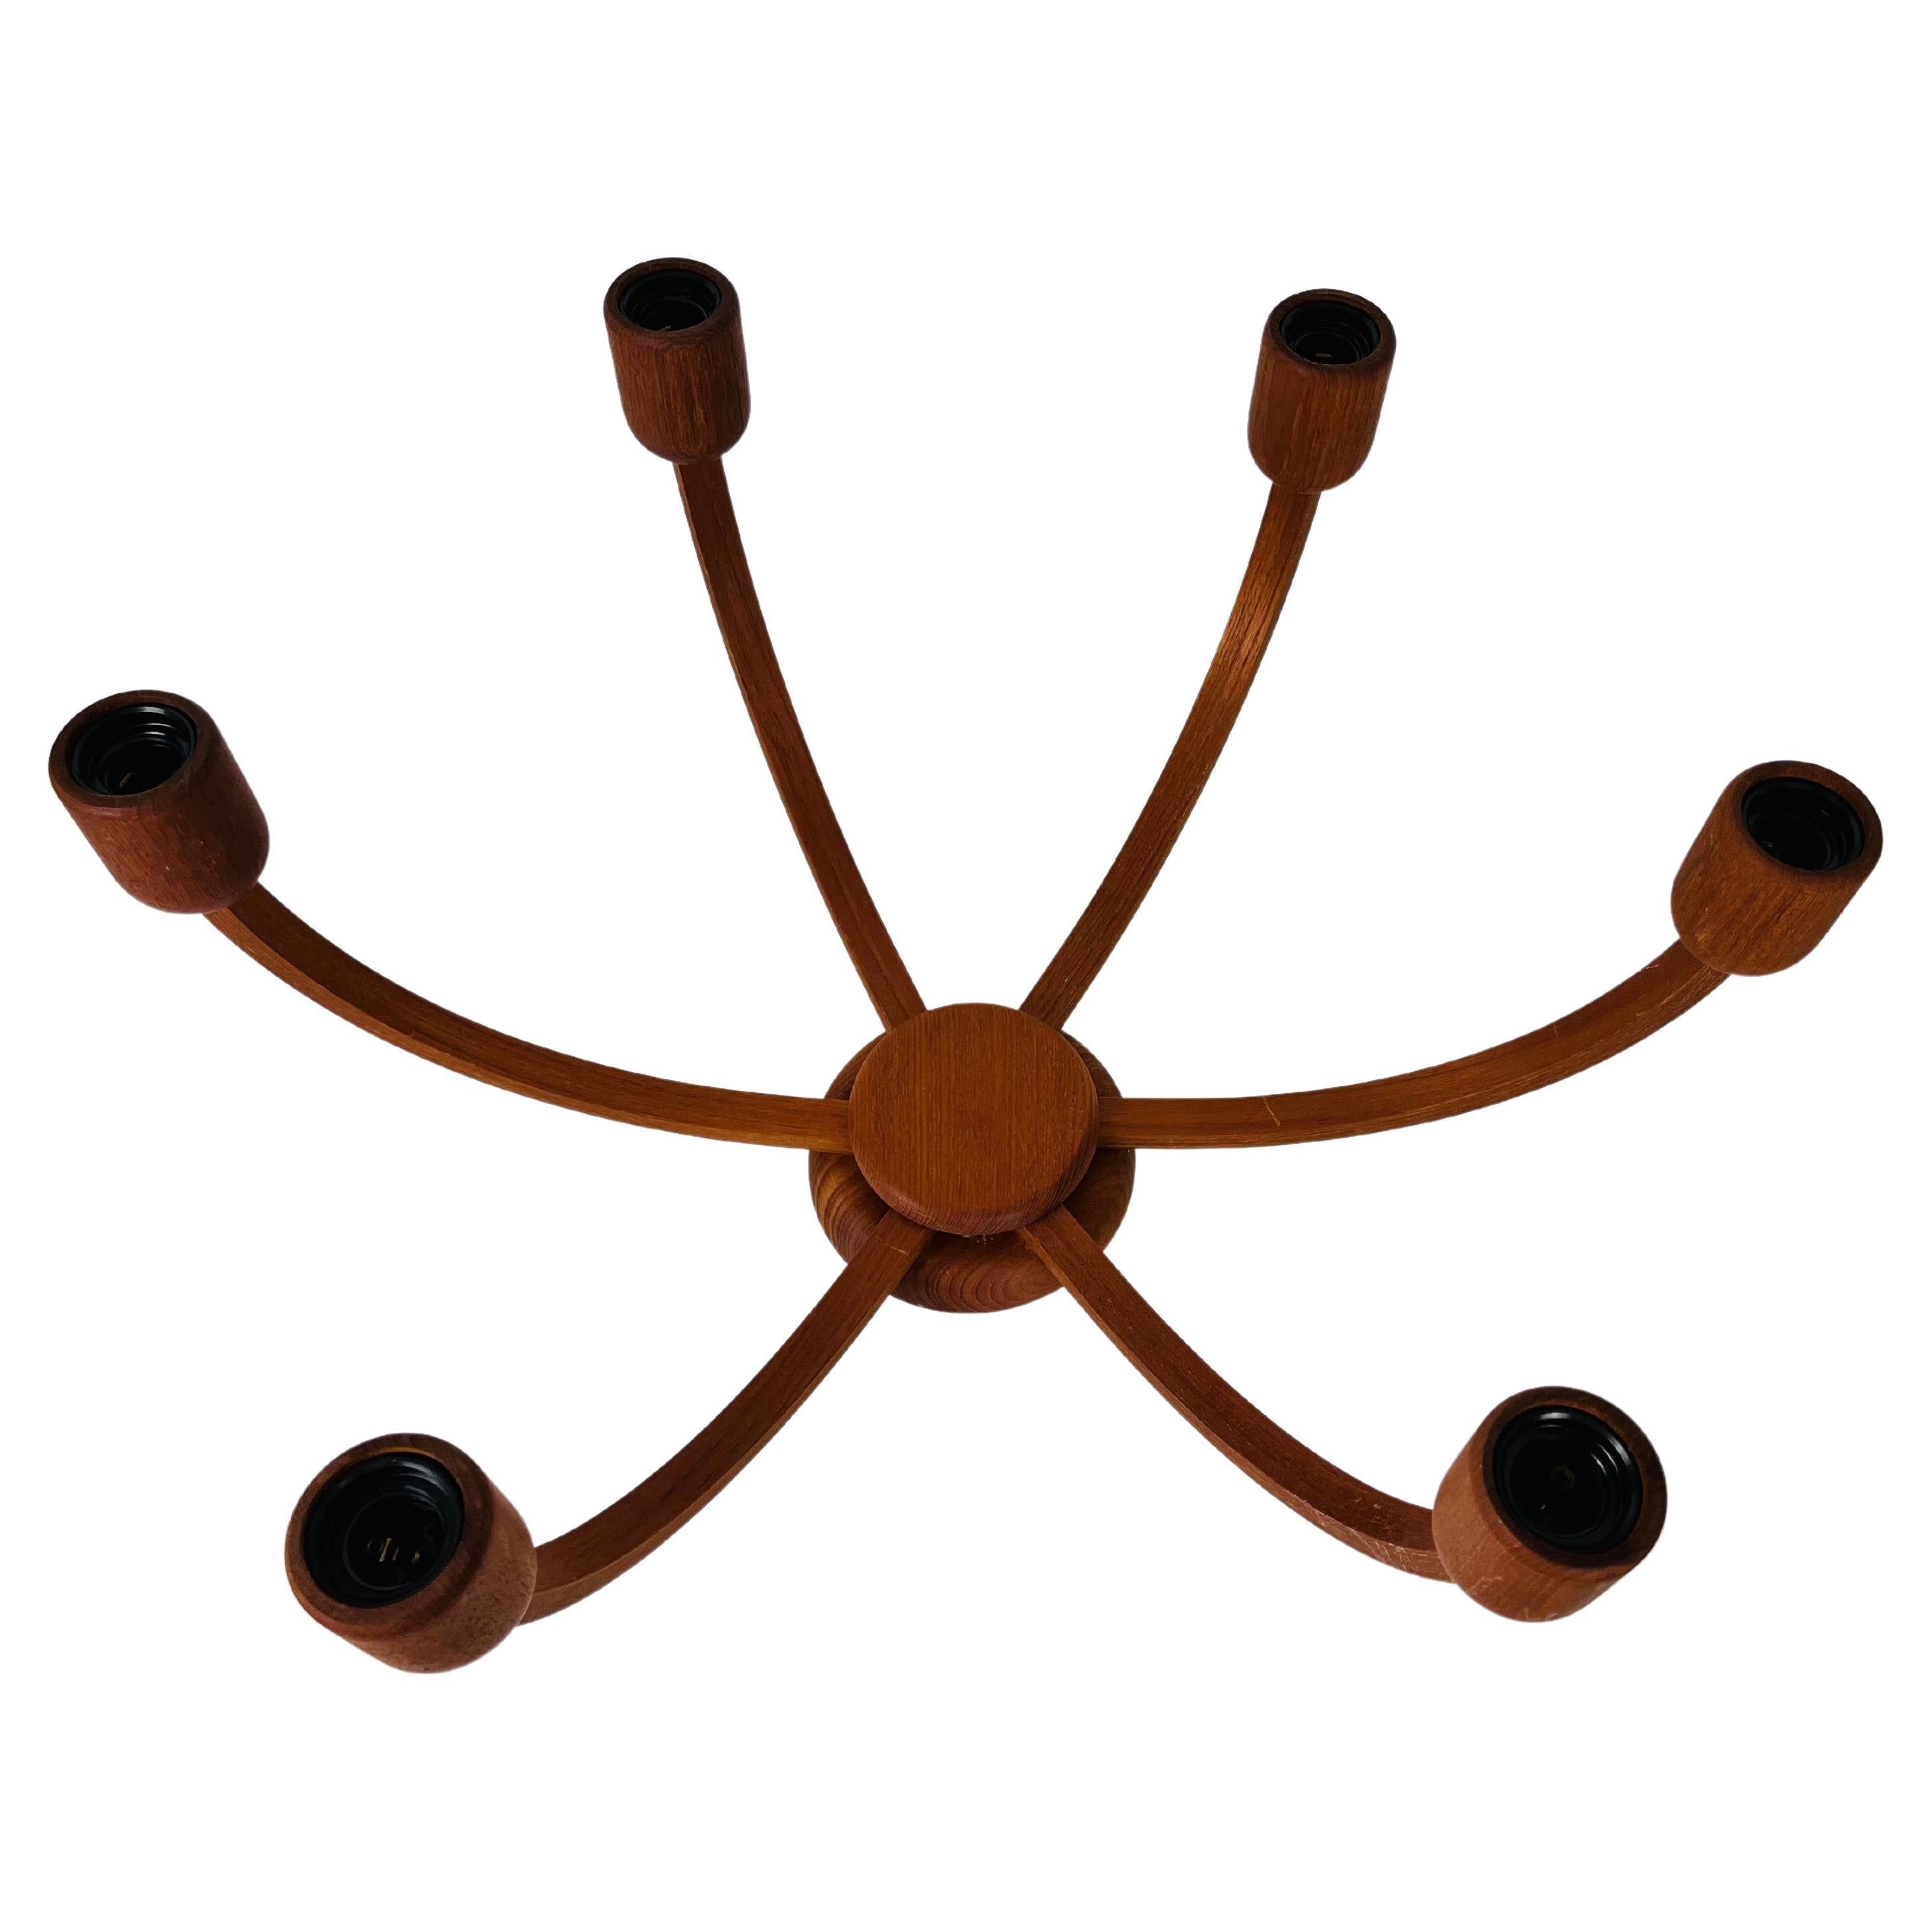 Large Midcentury Teak Pendant Lamp with 5 Arms by Domus, 1960s